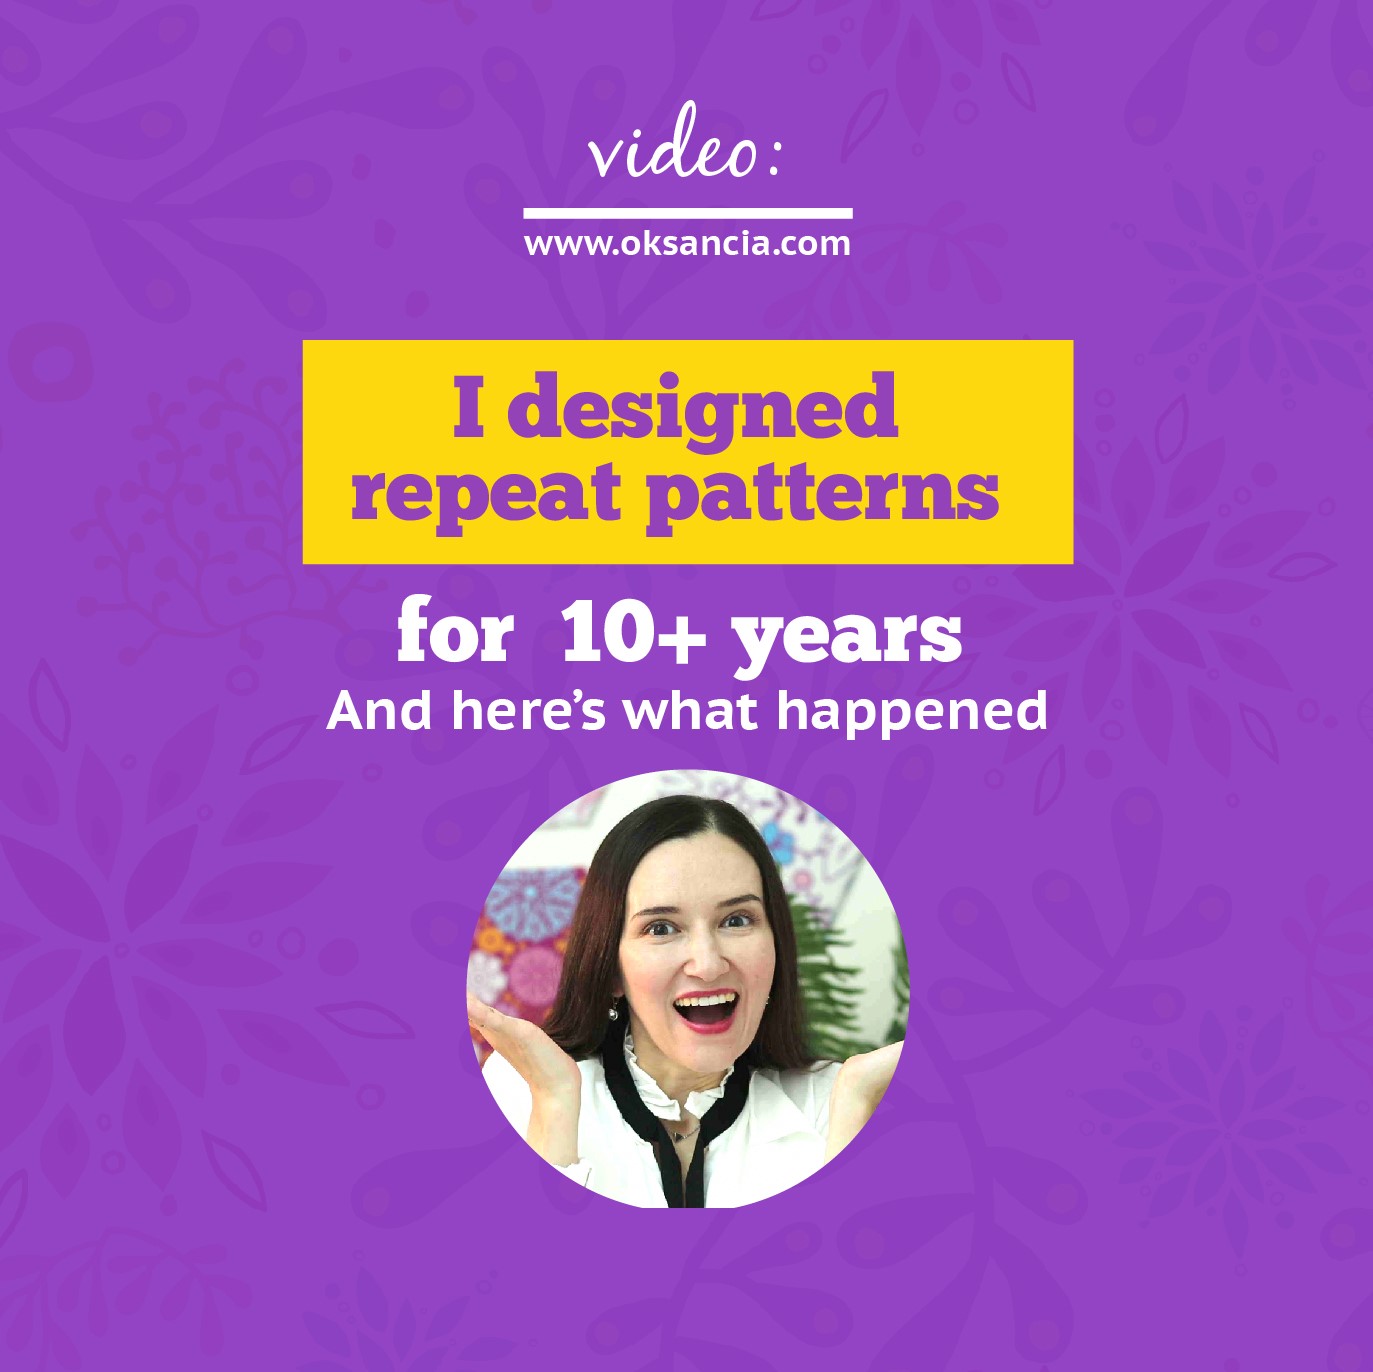 I designed vector repeat patterns for 10+ years and here is what happened